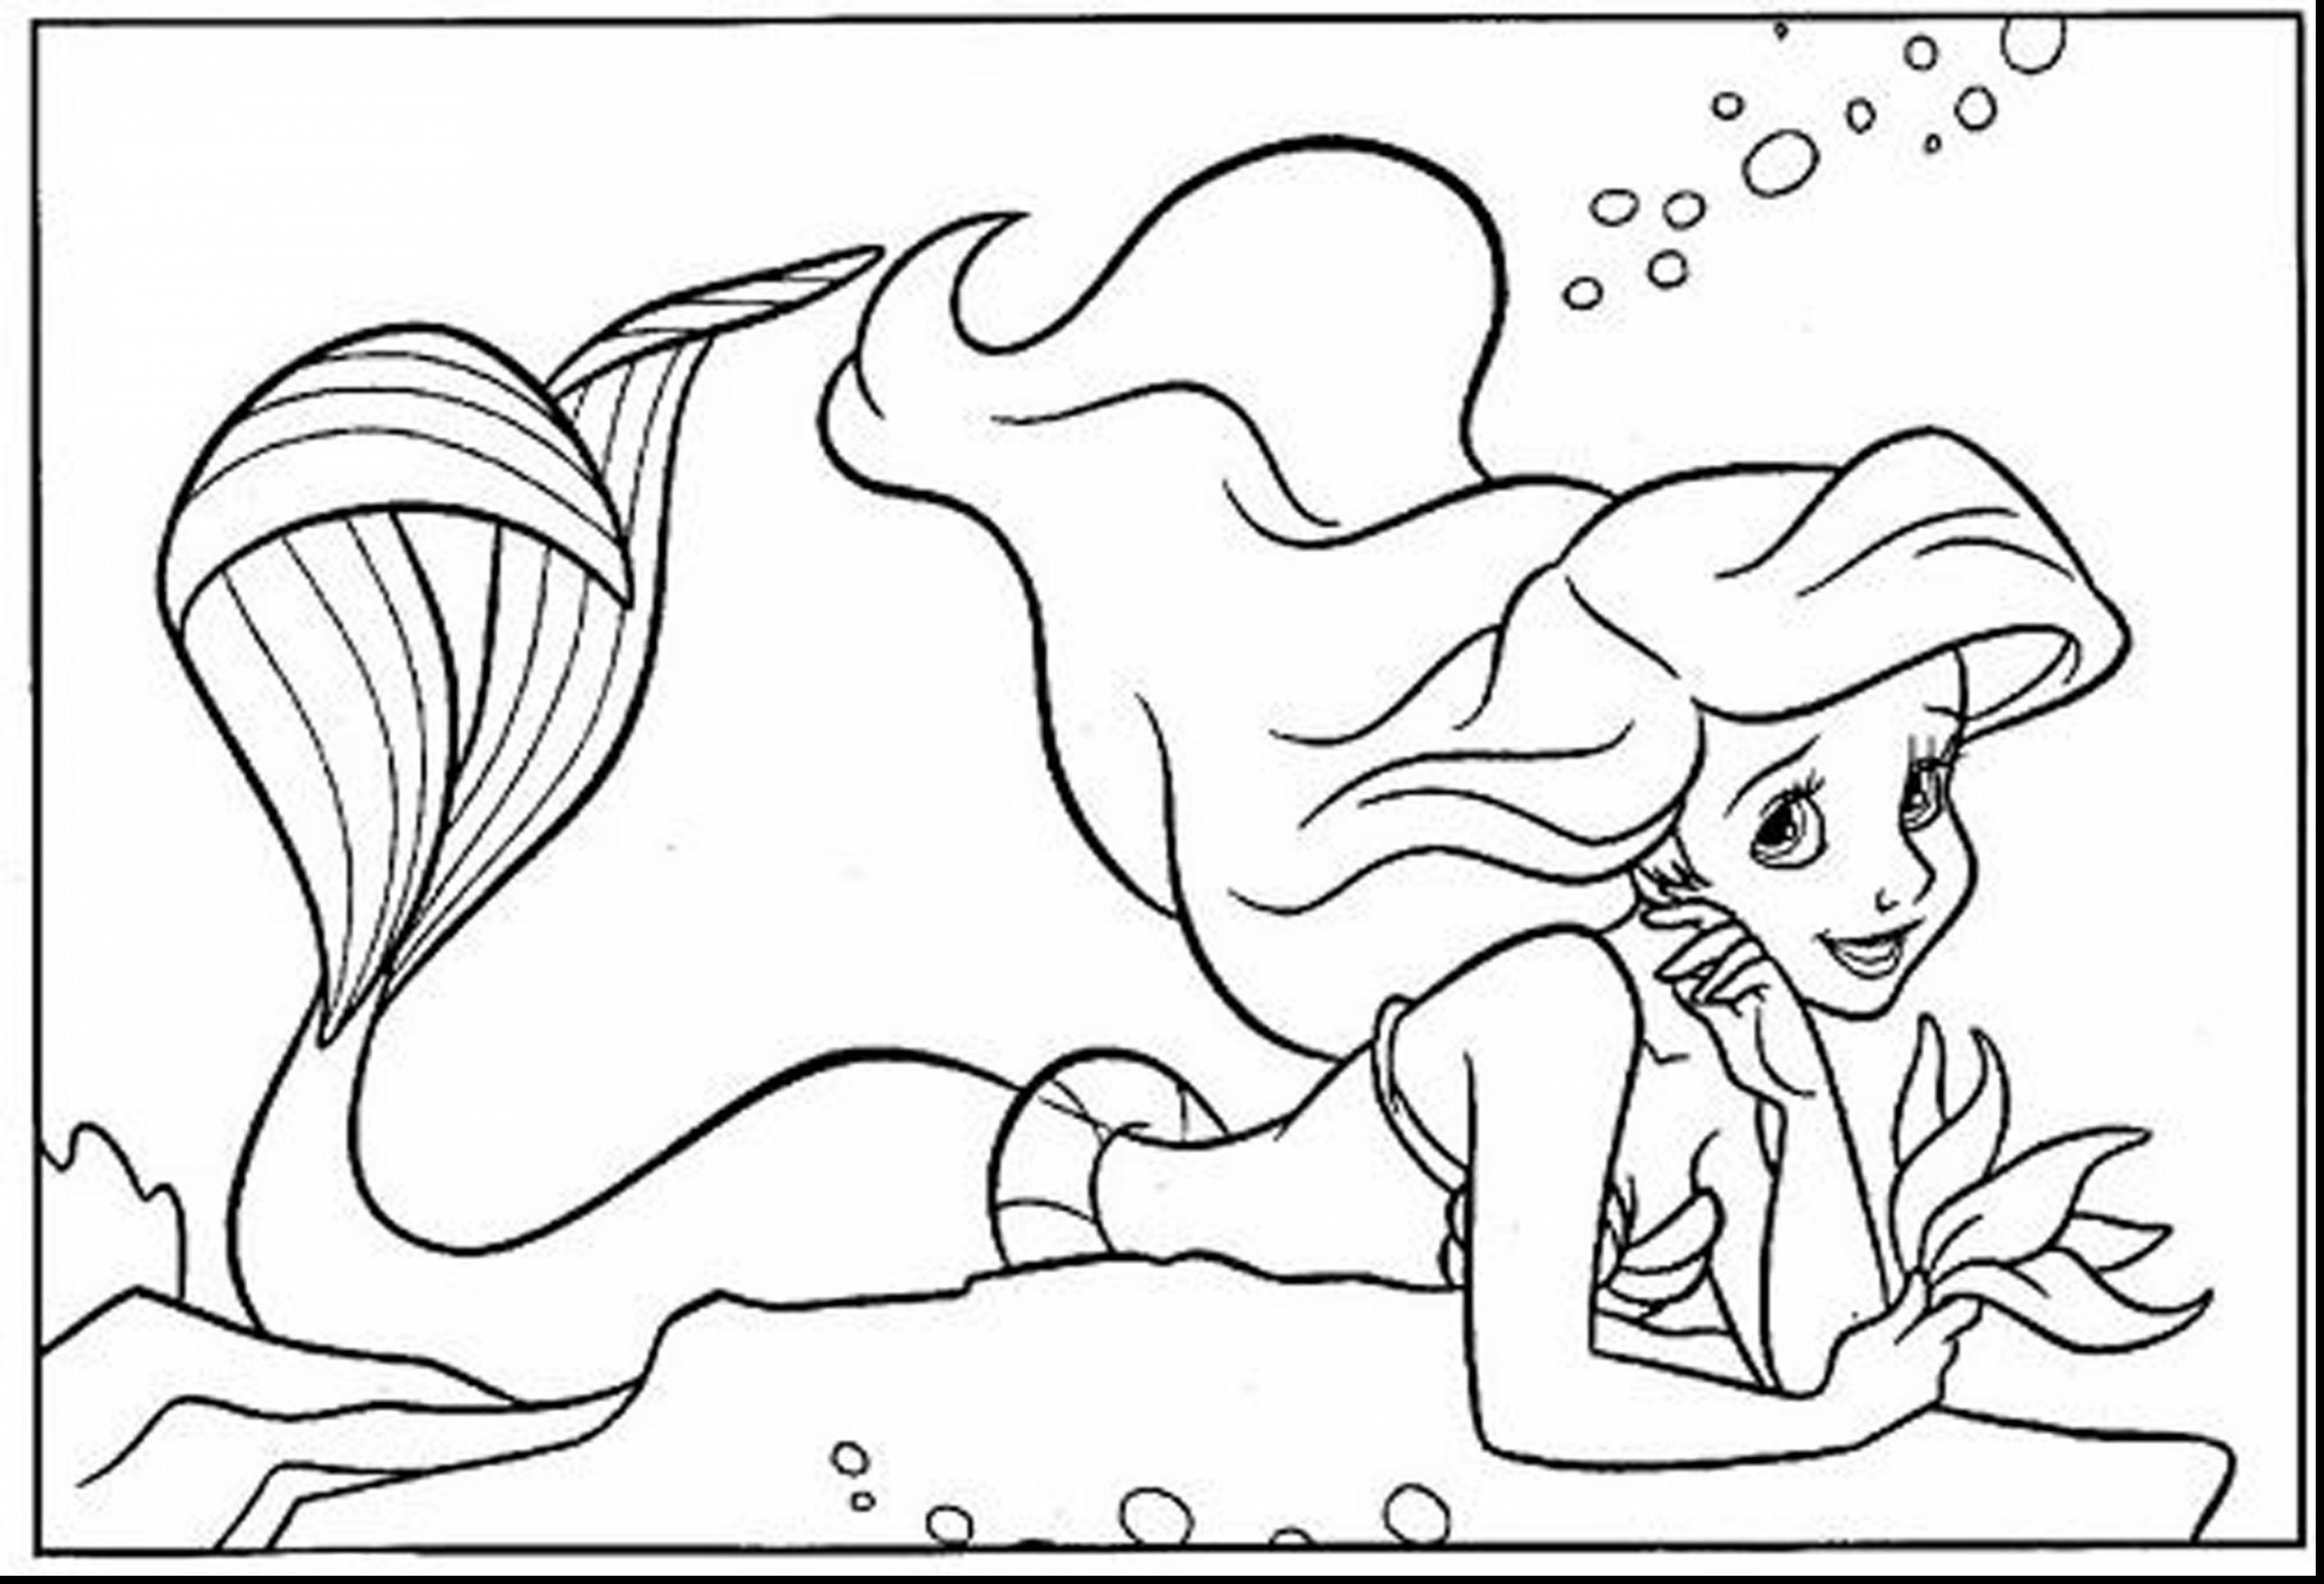 coloring-pages-for-girls-10-and-up-at-getcolorings-free-printable